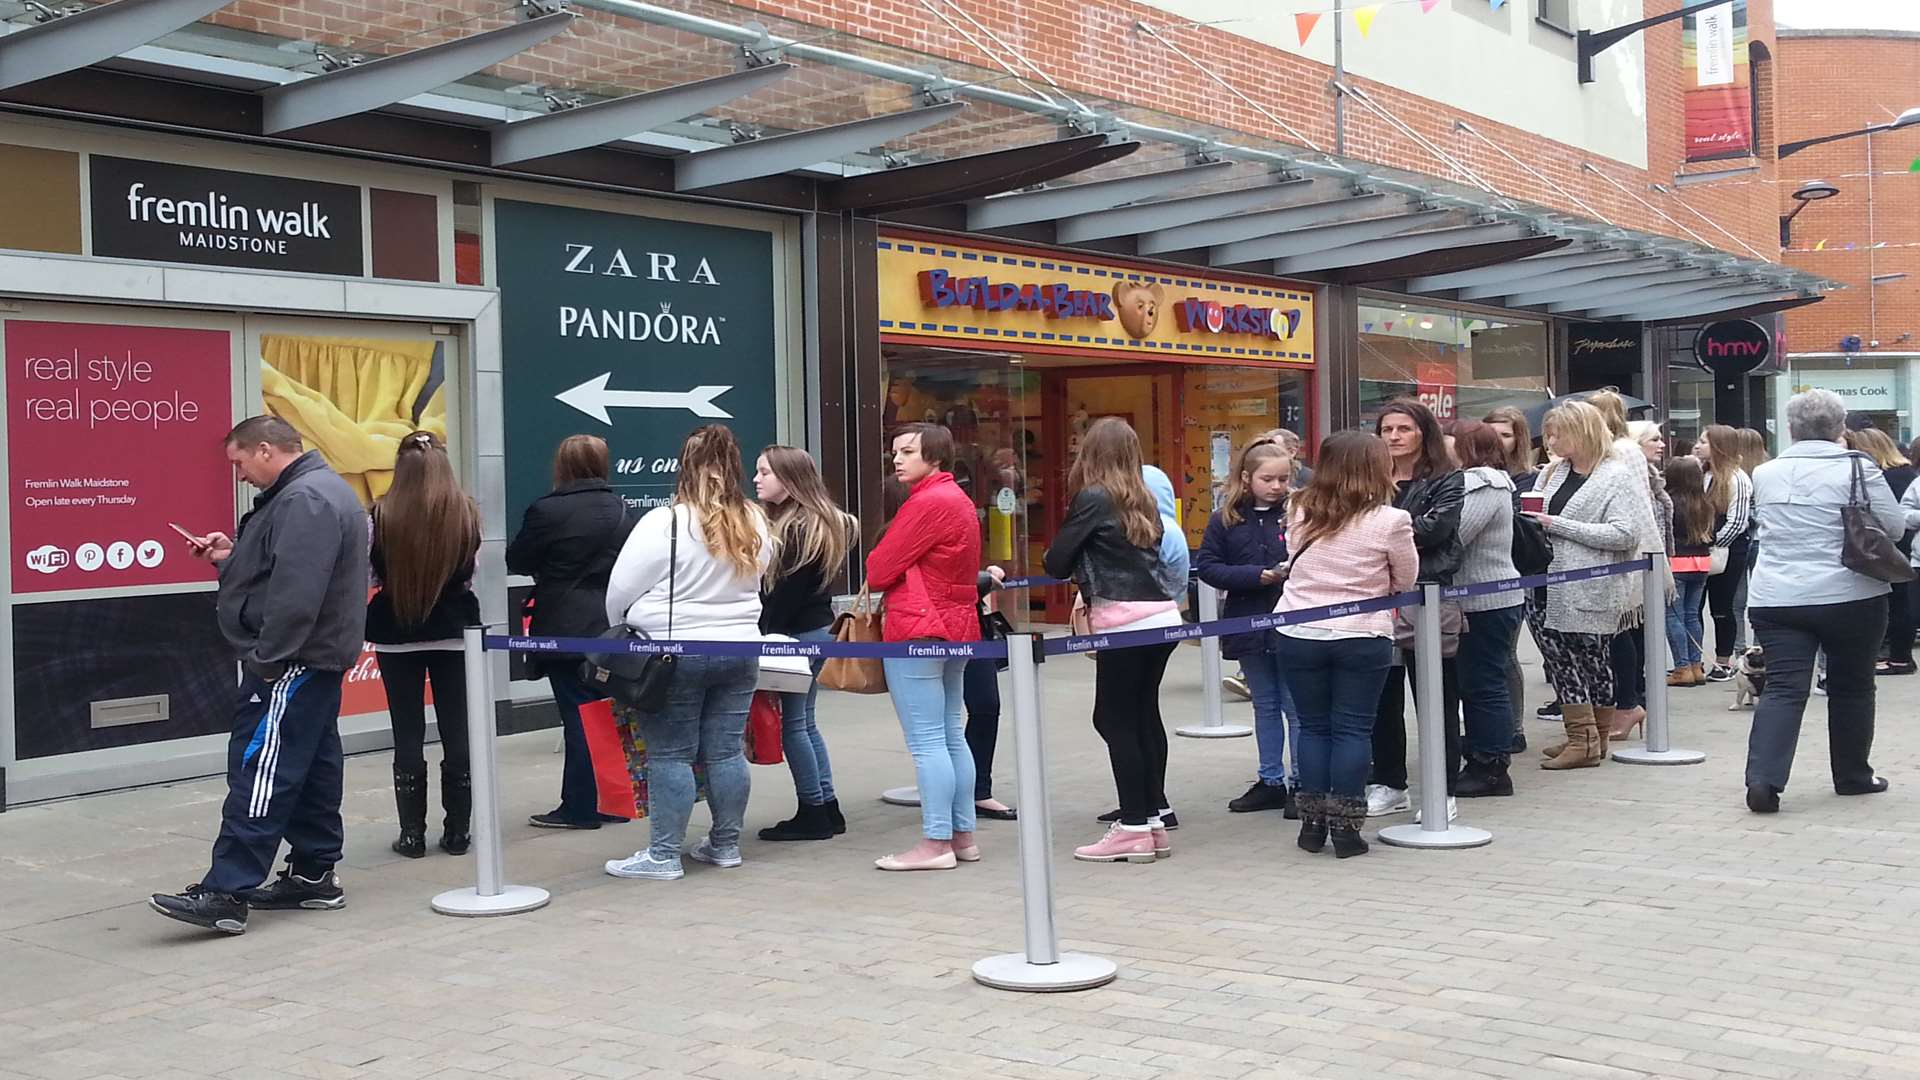 Fans queuing outside ahead of the opening